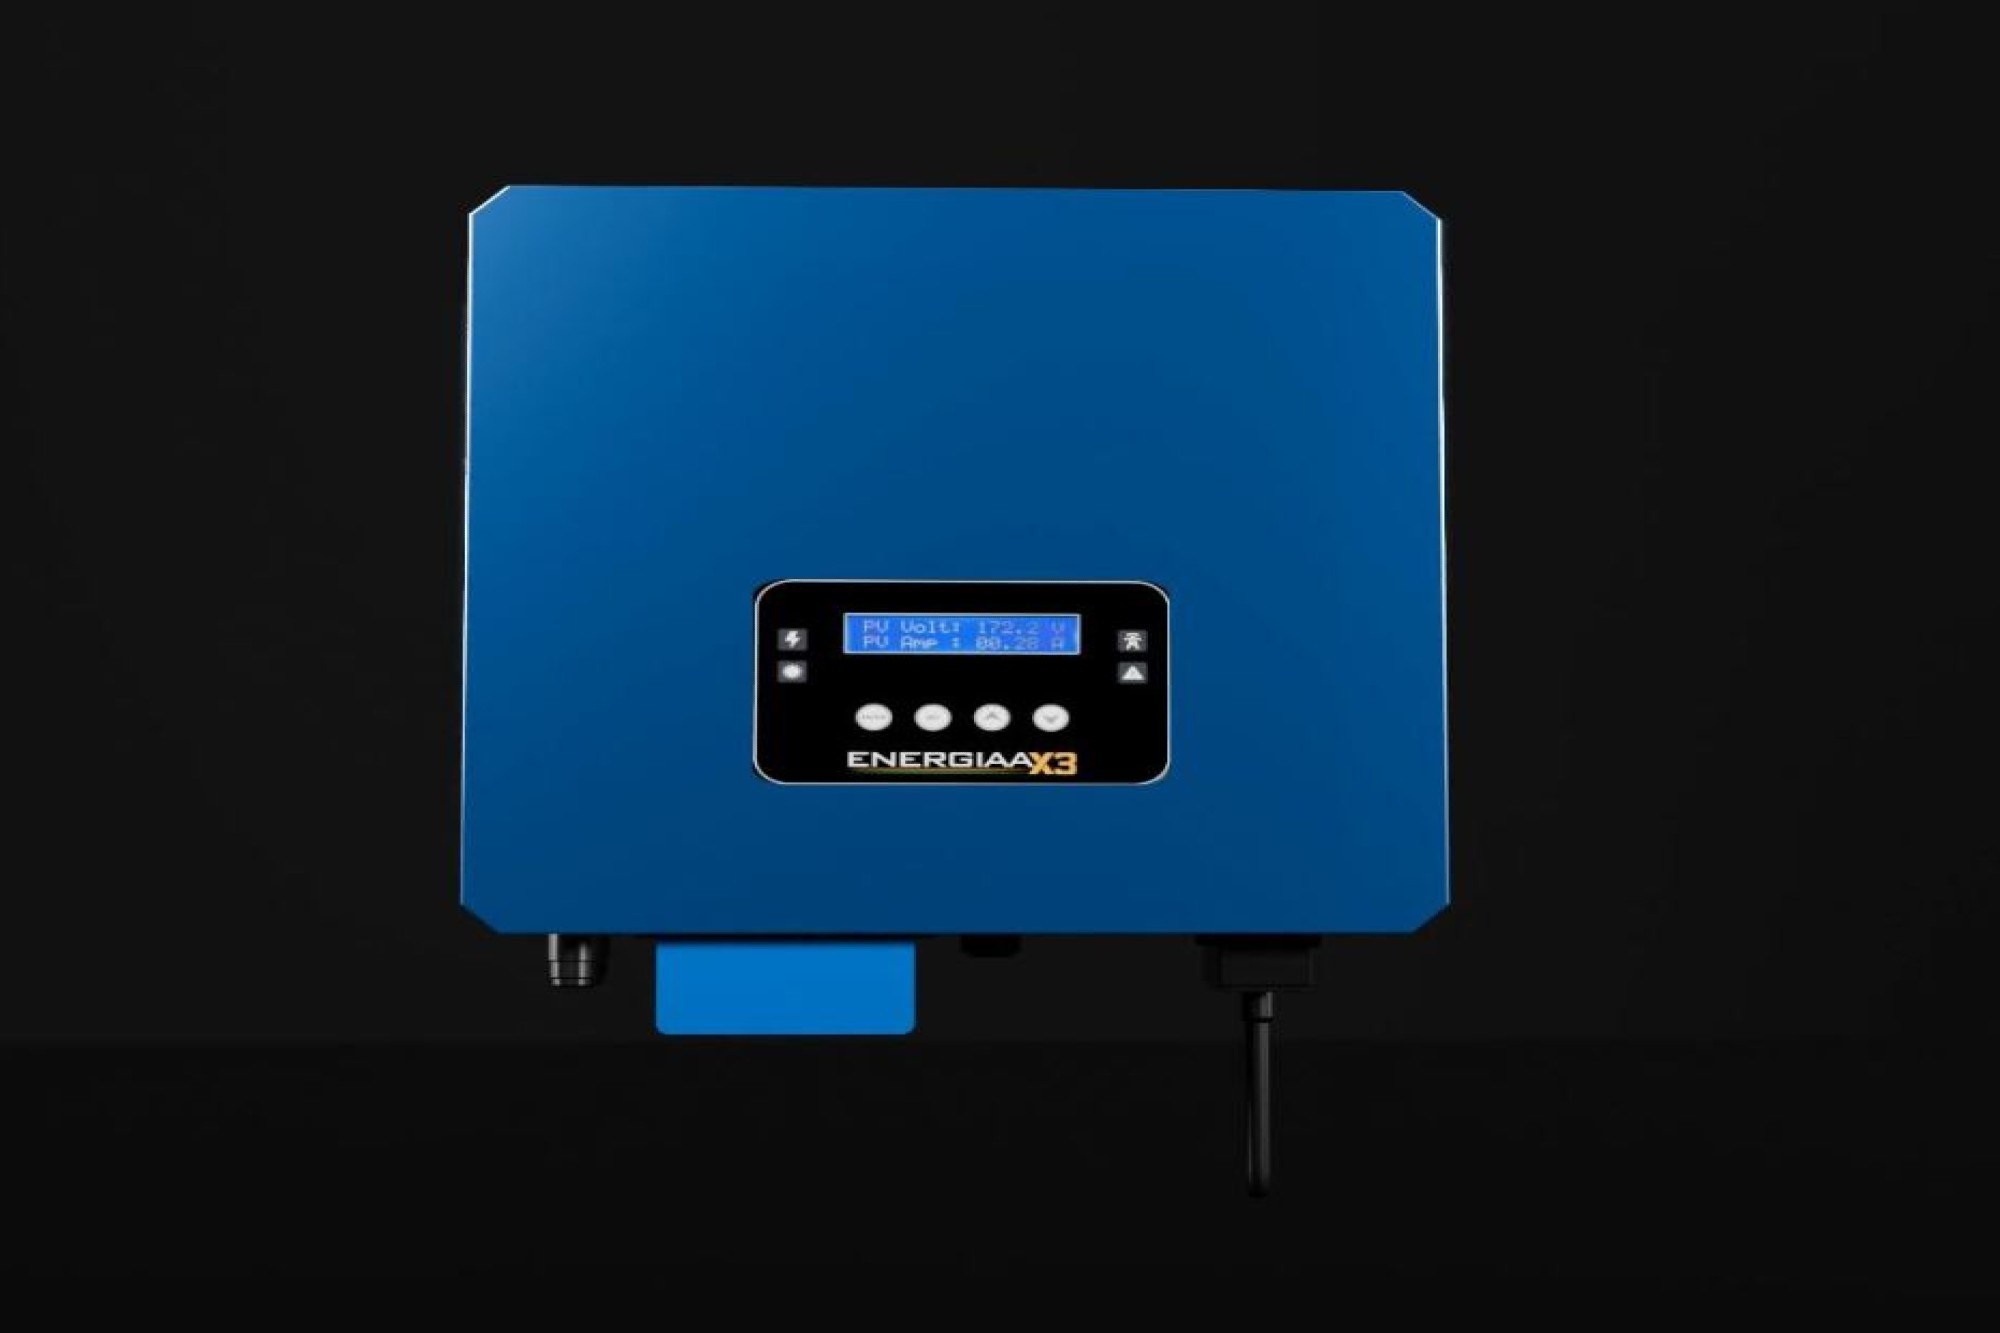 Statcon Energiaa releases the ENERGIAA X Series, the first Indian solar inverter designed entirely in India